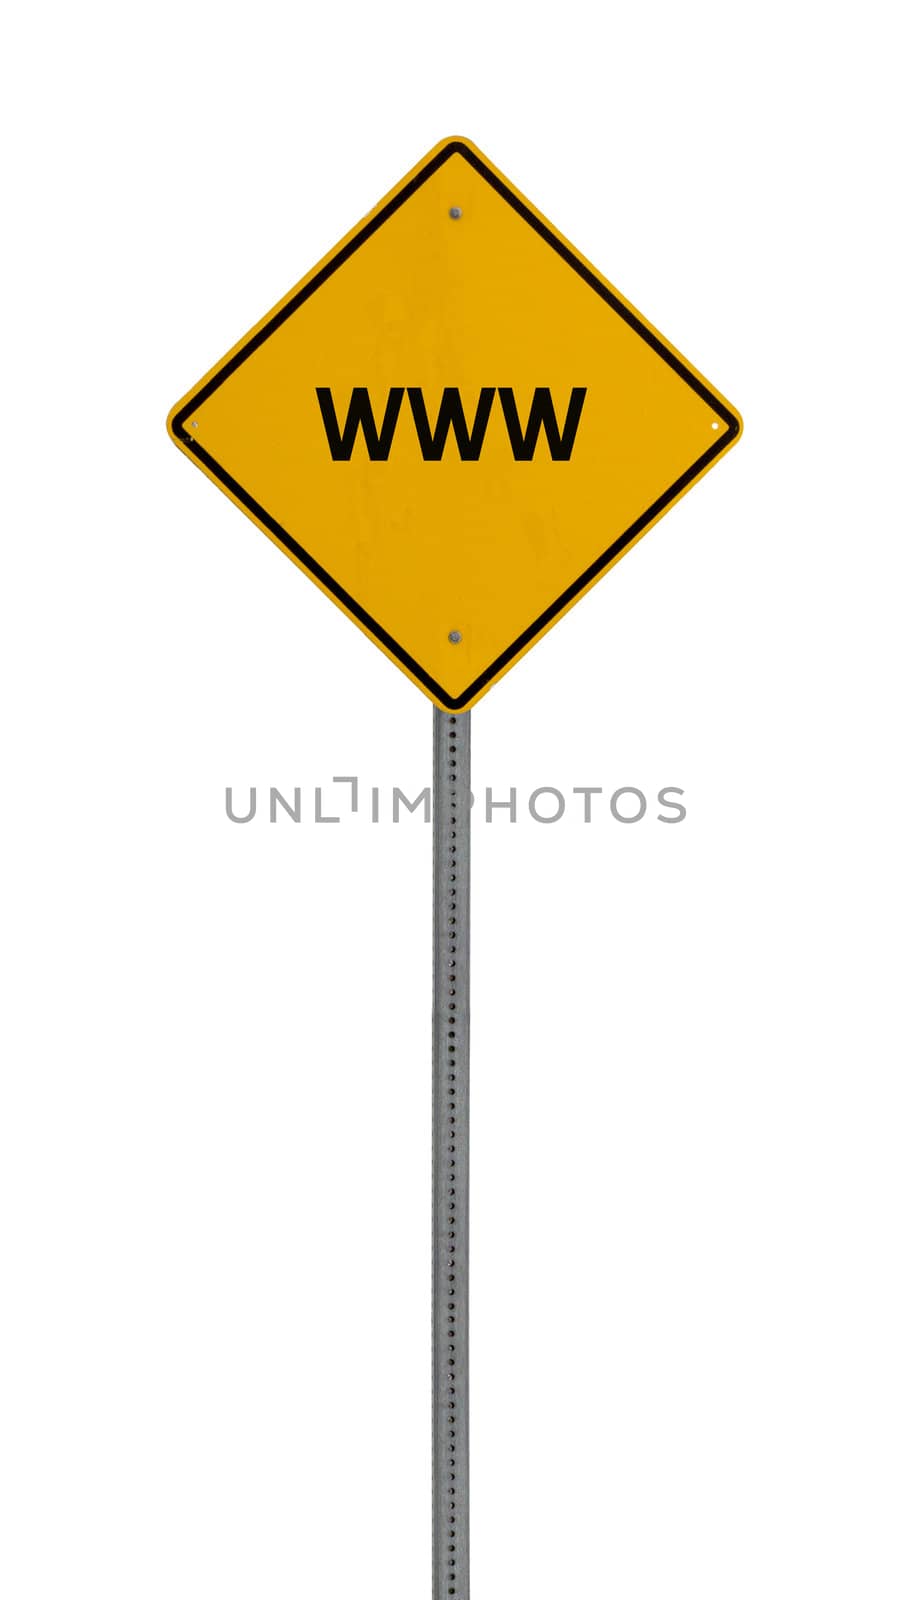 www - Yellow road warning sign by jeremywhat